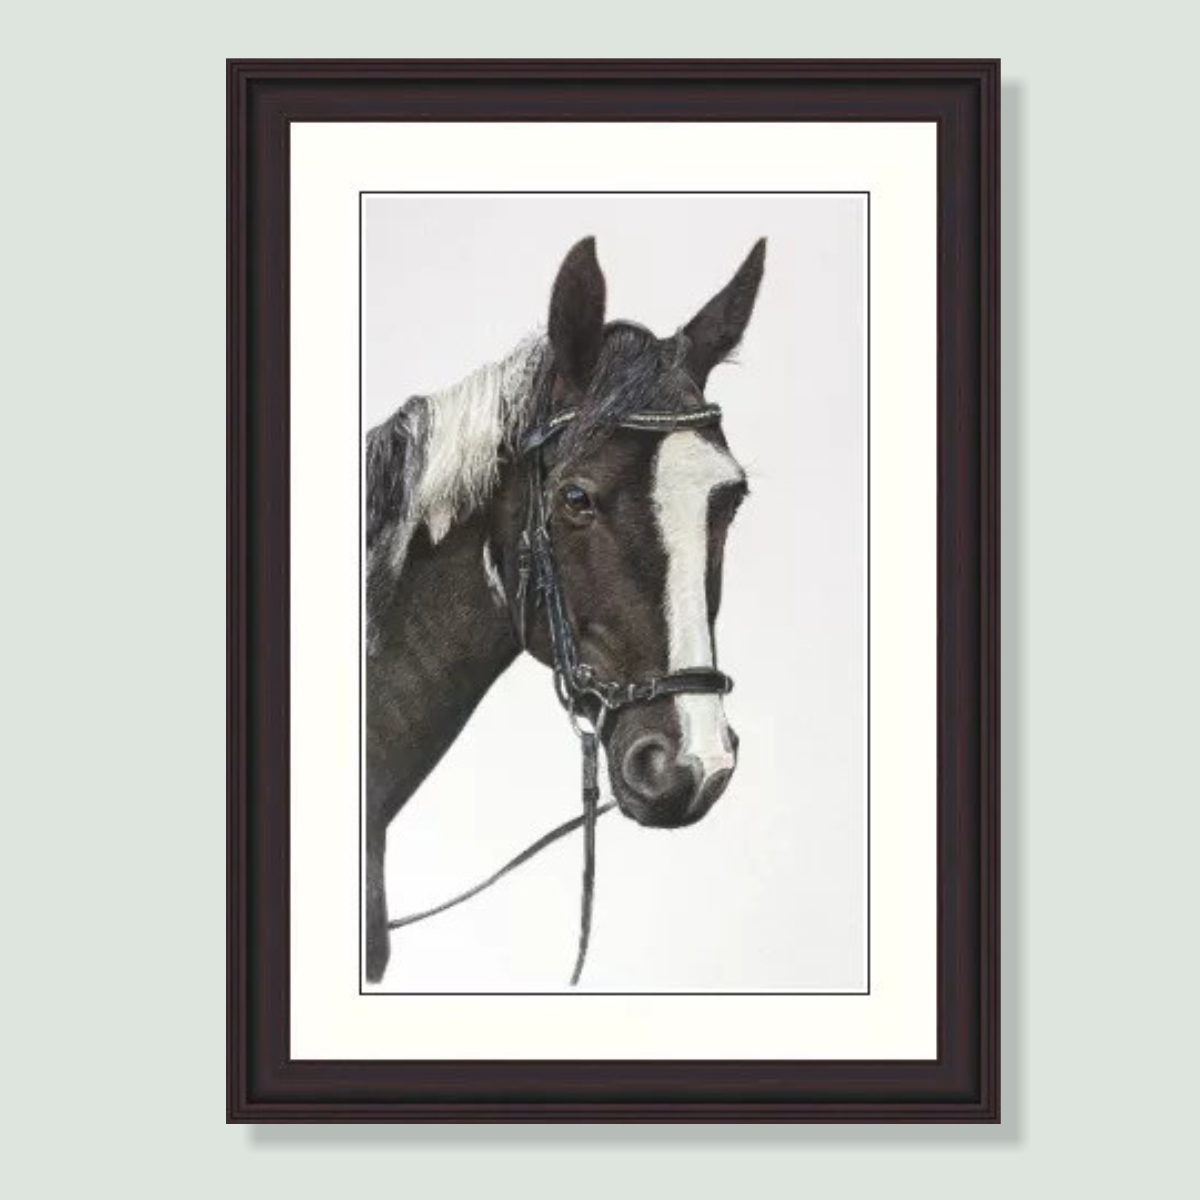 Melody - coloured pencil horse portrait by pet artist Angie.